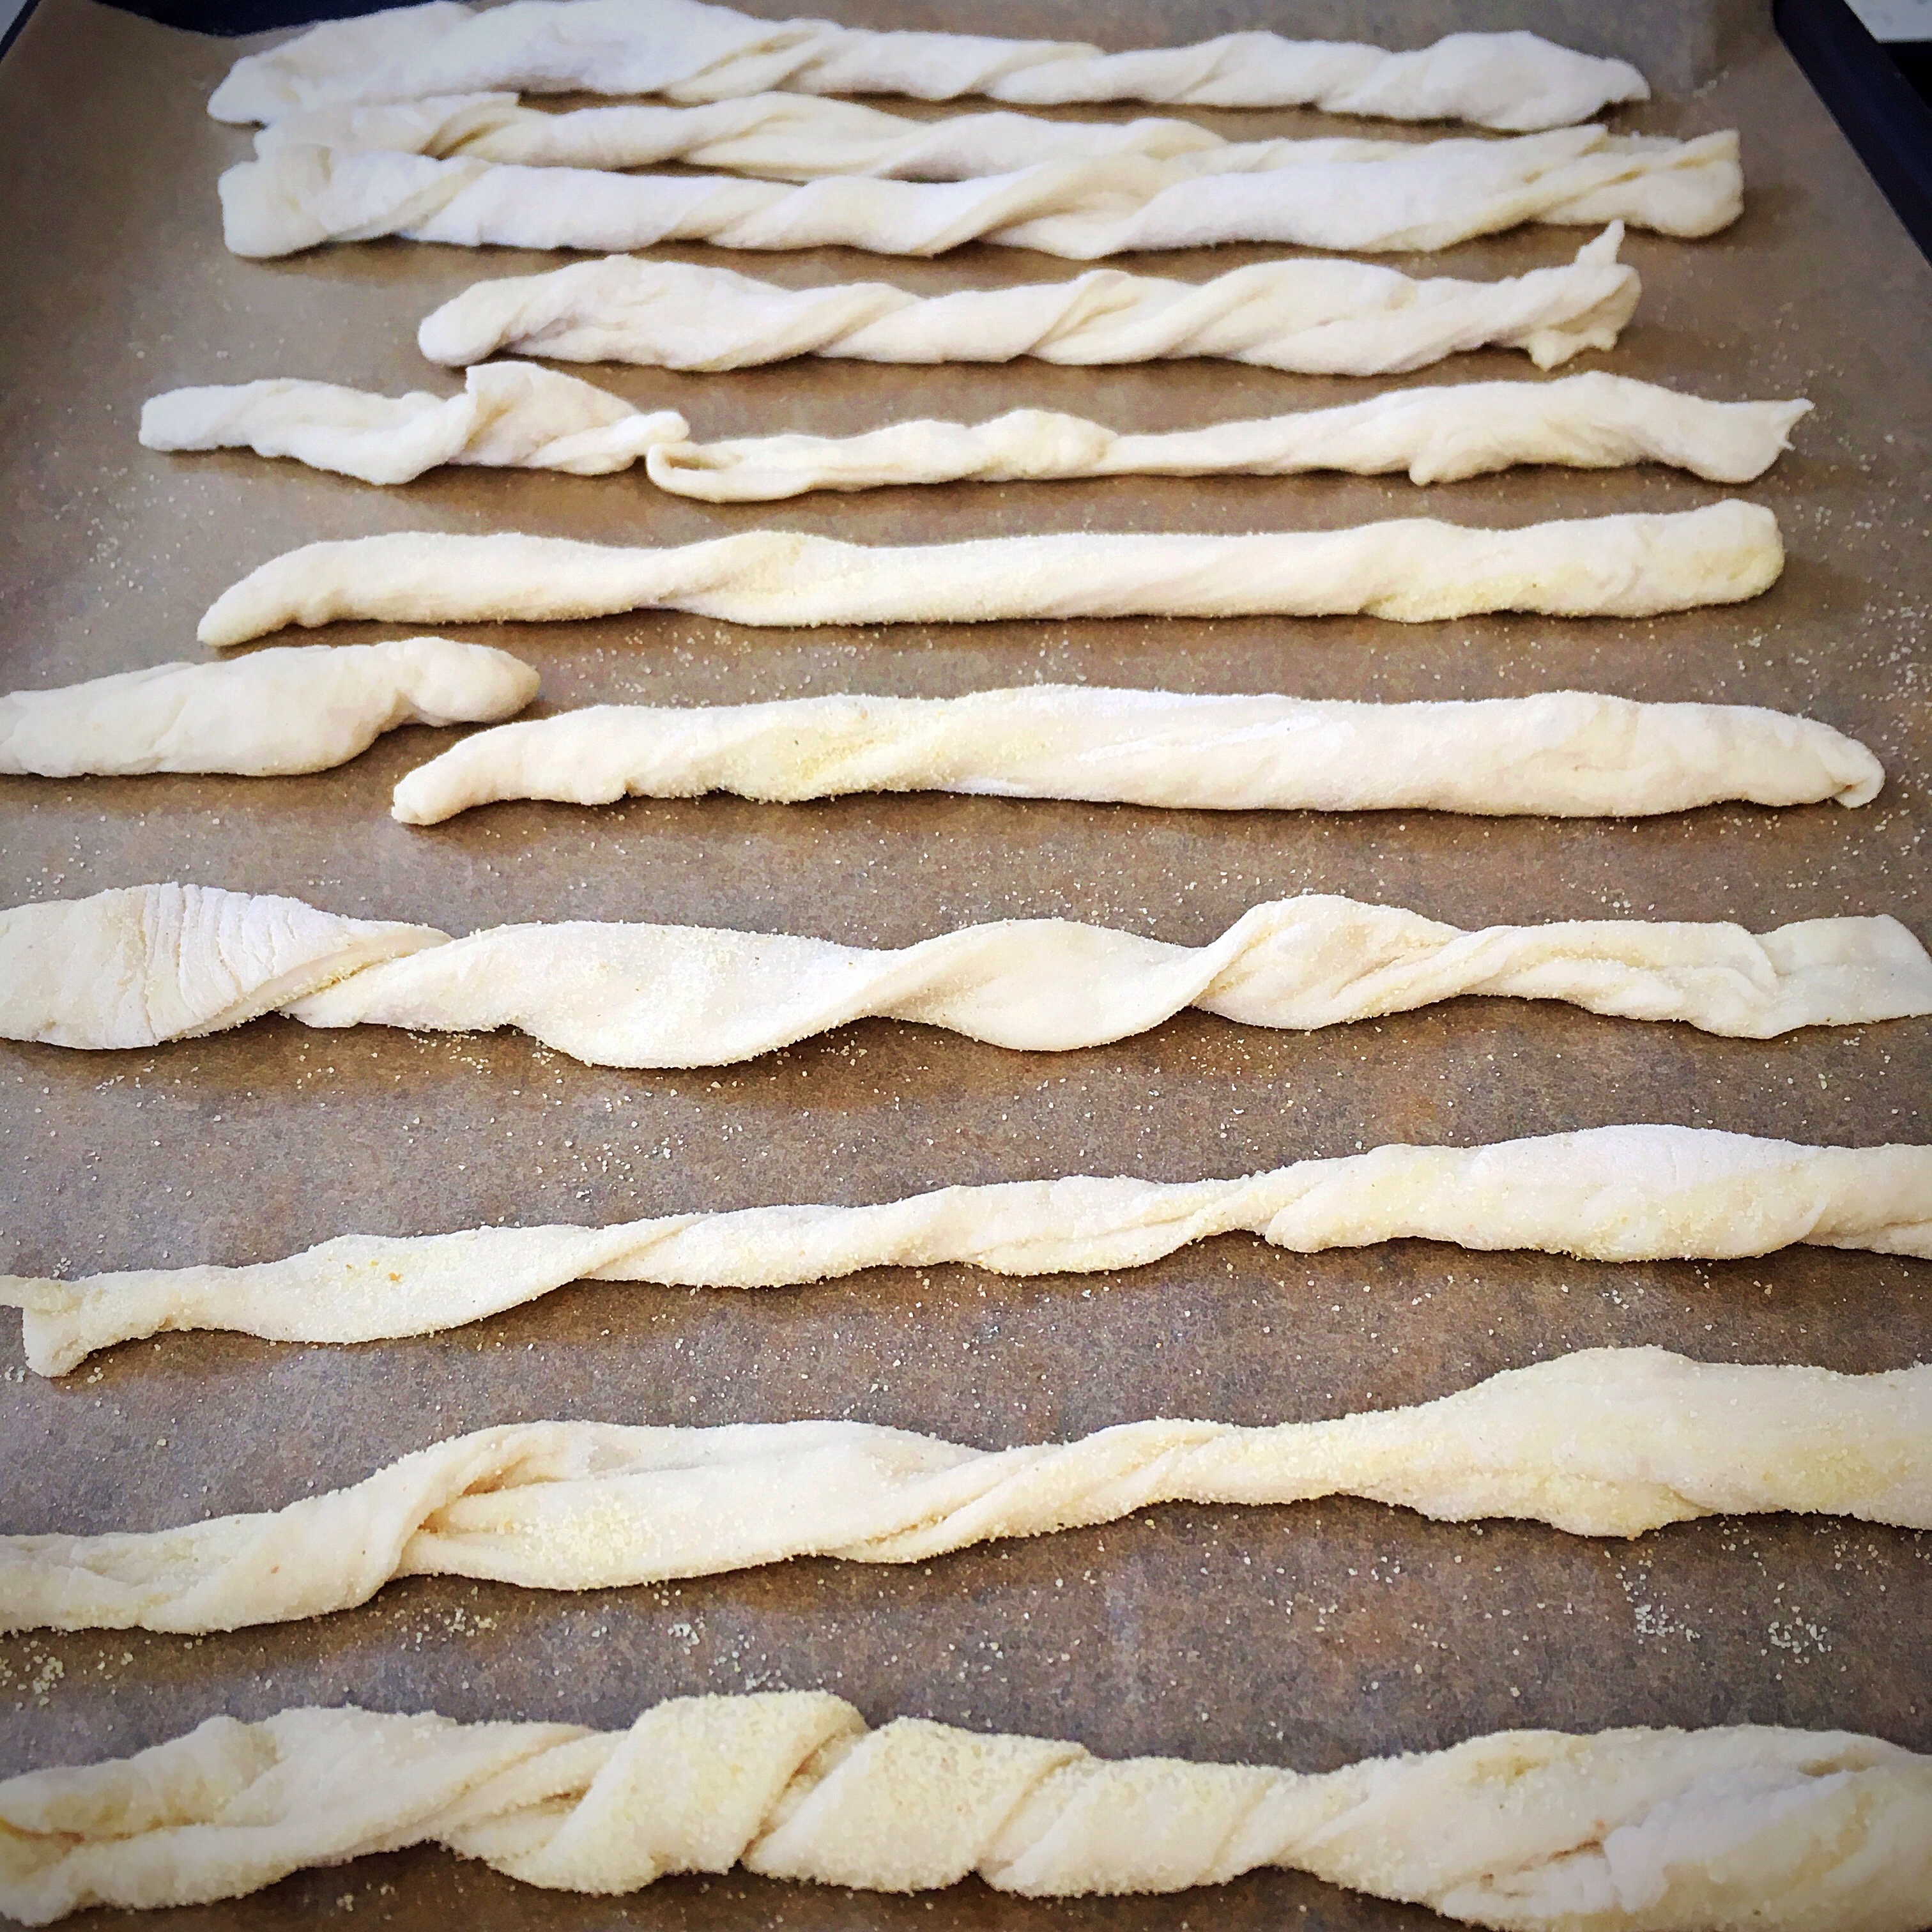 A tray of dough is lined up on the counter.